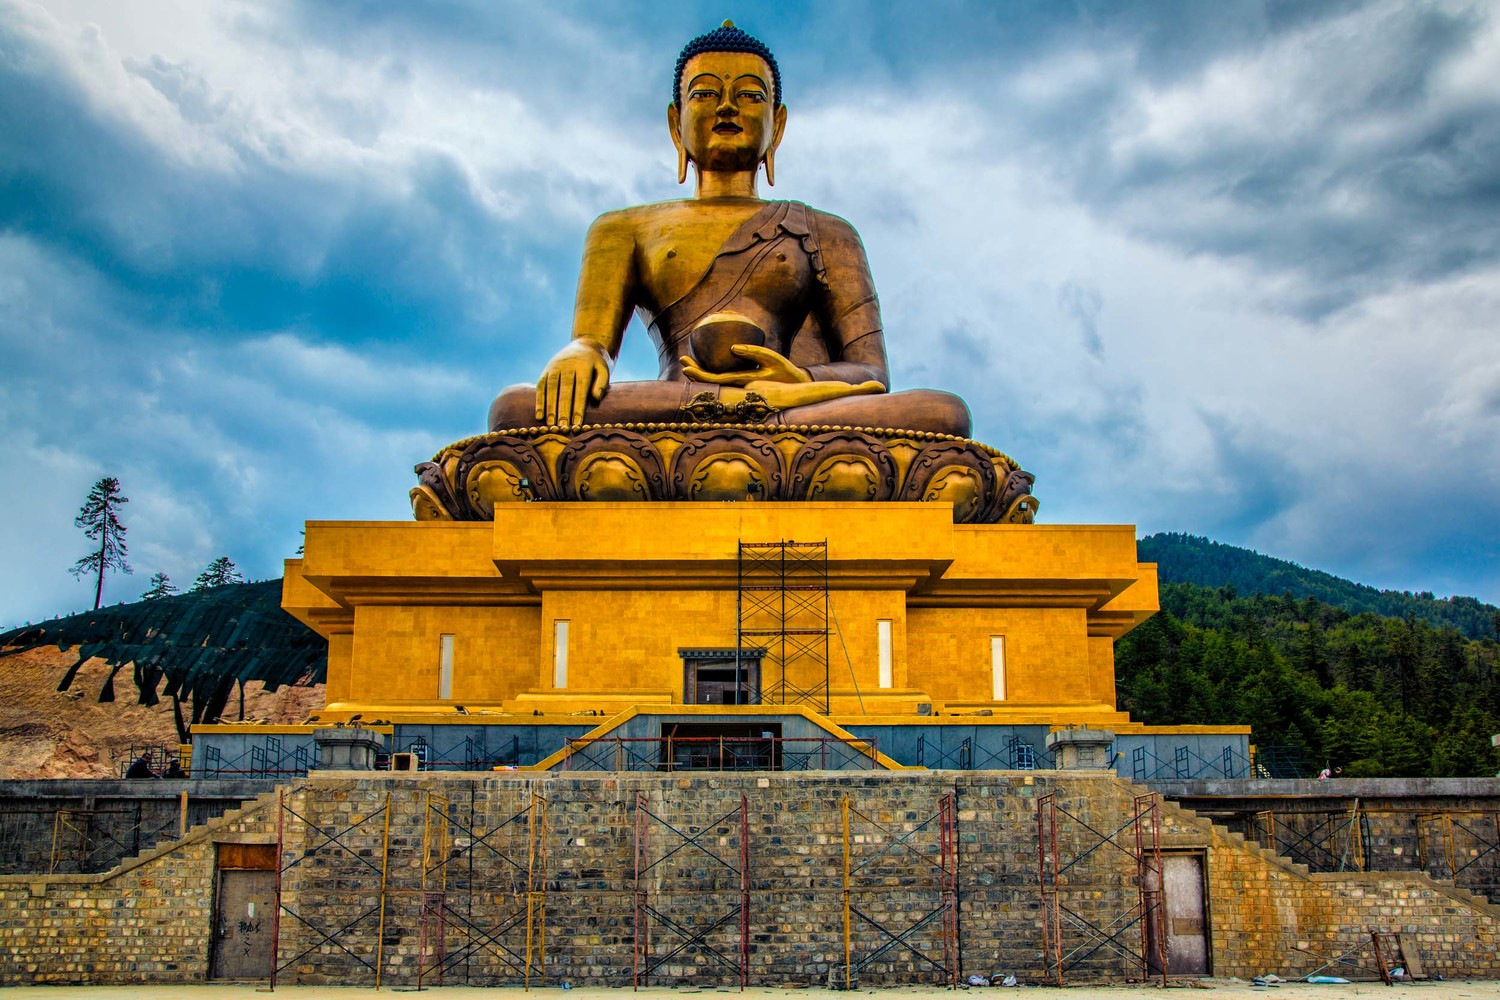 Towering in at a height of 169 ft (51.5m), this is one big Shakyamuni Buddha statue that is being built. Made of bronze and gilded in gold, it will house 100,000 8-inch-tall and 25,000 12-inch-tall statues of Buddha also made of bronze and gilded in gold. Situated on the side of a mountain, the Buddha overlooks the southern approach into Thimphu. 

The views looking down into the valley are splendid, and like most Buddhist temples and monuments, you can feel you've escaped from the hustle and bustle of the city. Not that, Thimphu is exactly a vast metropolitan area offering anonymity to the countless souls going about their daily business, but it's still an escape to a grand viewpoint with a touch of serenity. 

Elevation: 8,831 ft.